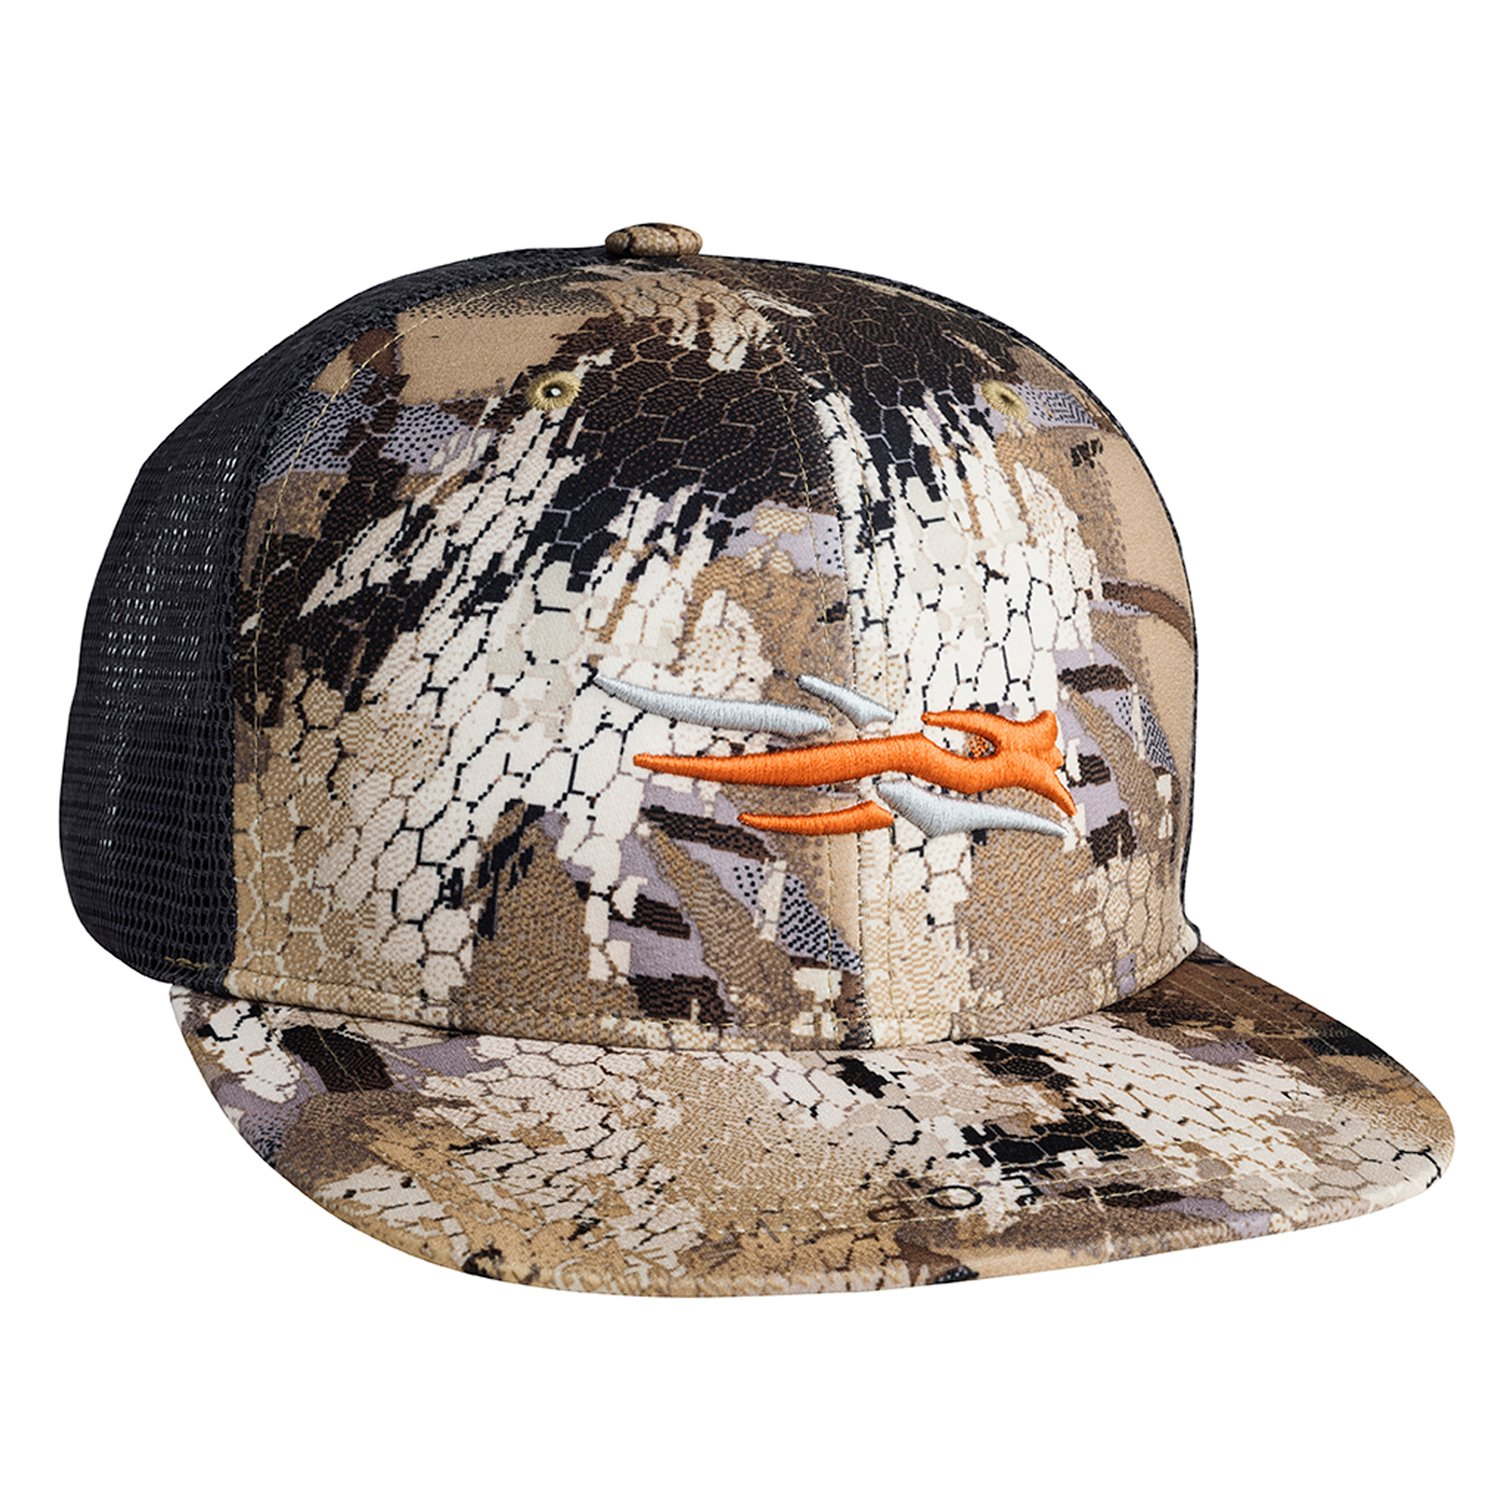 ONE.SIZE/OPTIFADE.OPEN.CNTRY 90104-OB-OSFA SITKA Youth Sitka Cap